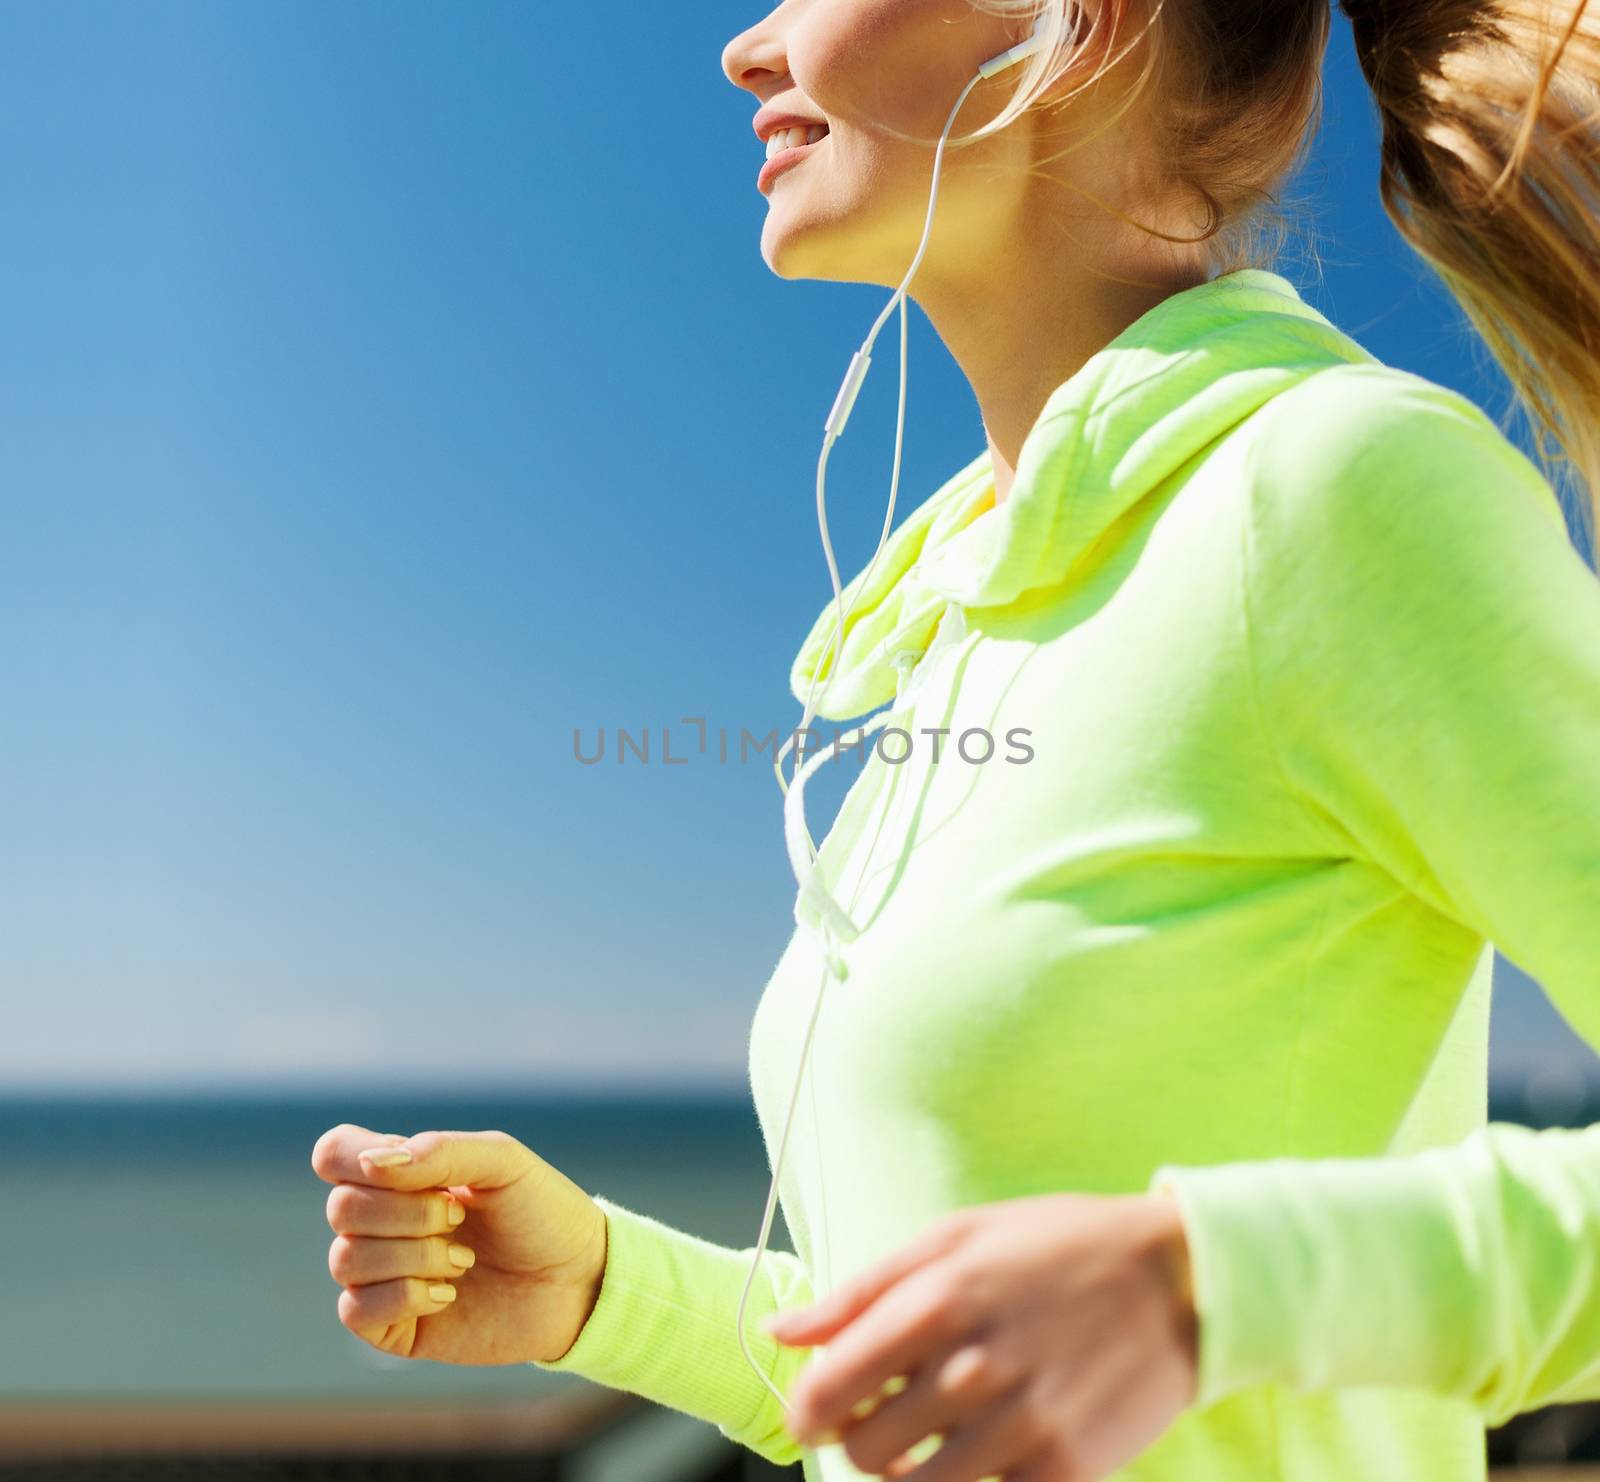 sport and healthy lifestyle concept - woman running and listening music with earphones outdoors